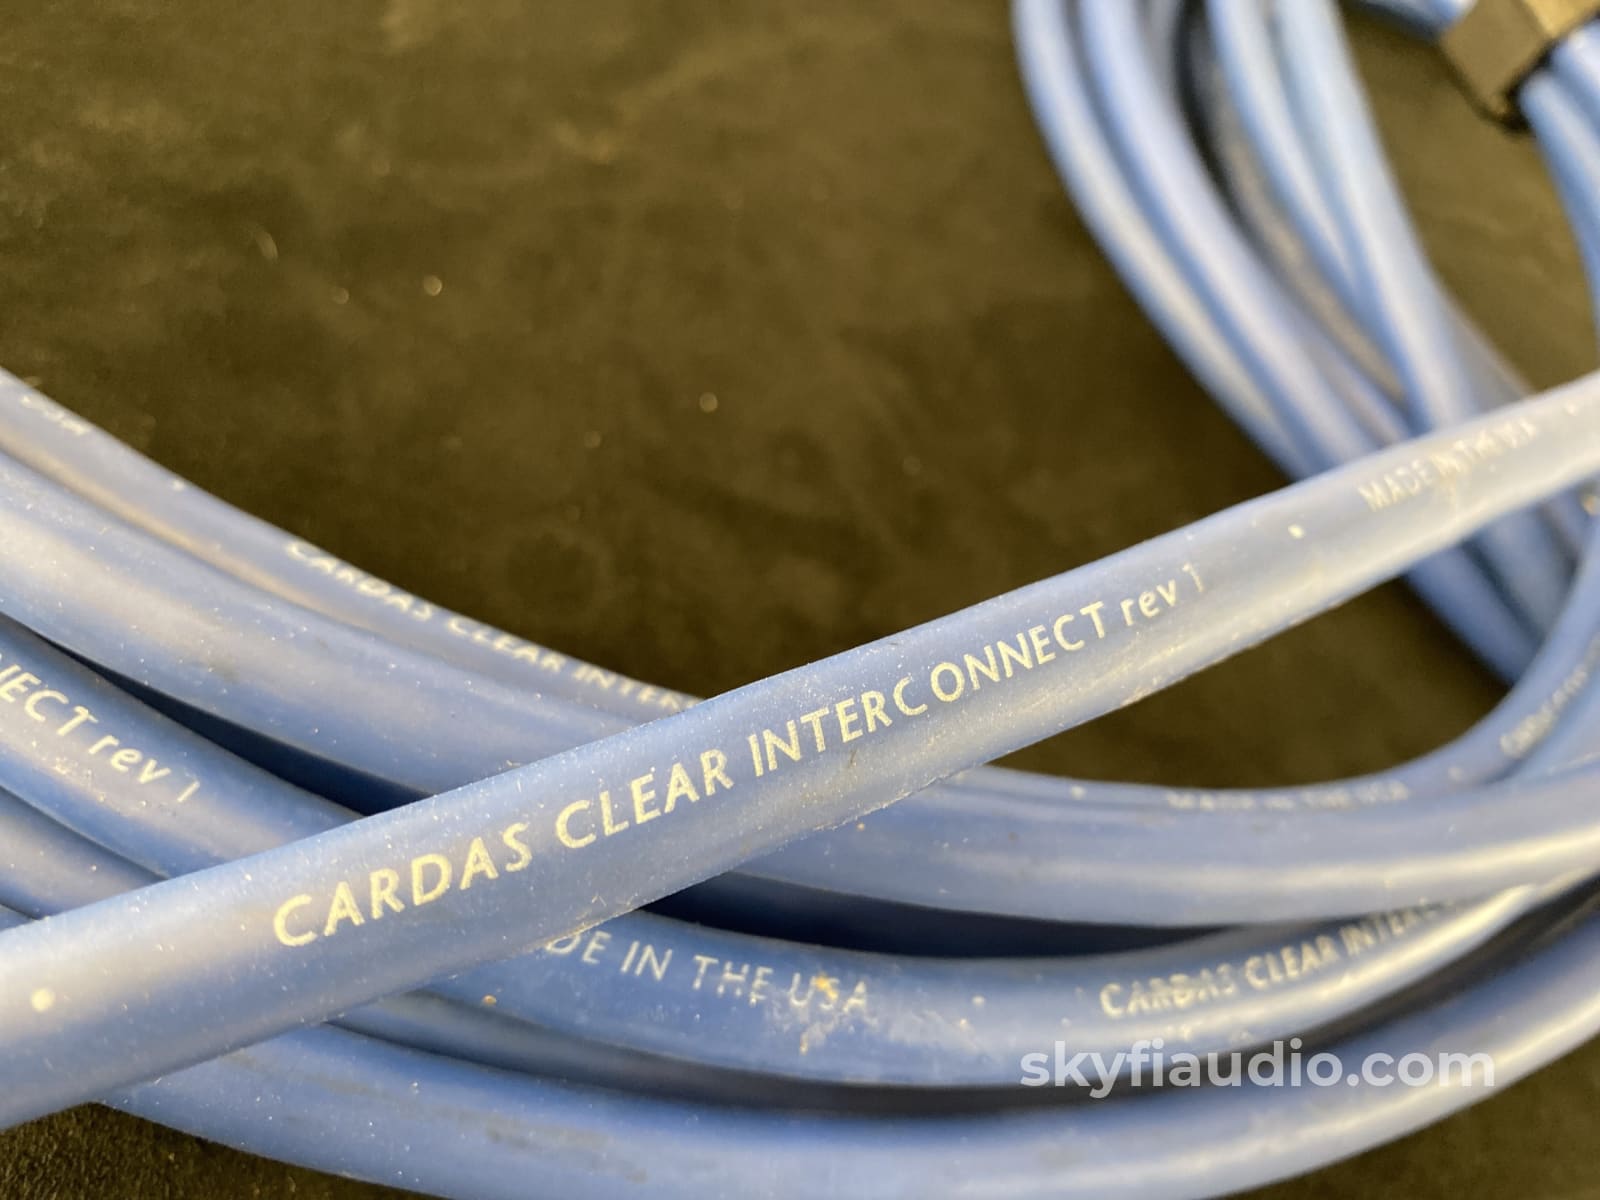 Cardas Clear Audio Interconnect Rev 1 Analog Xlr Cables - 8.3M